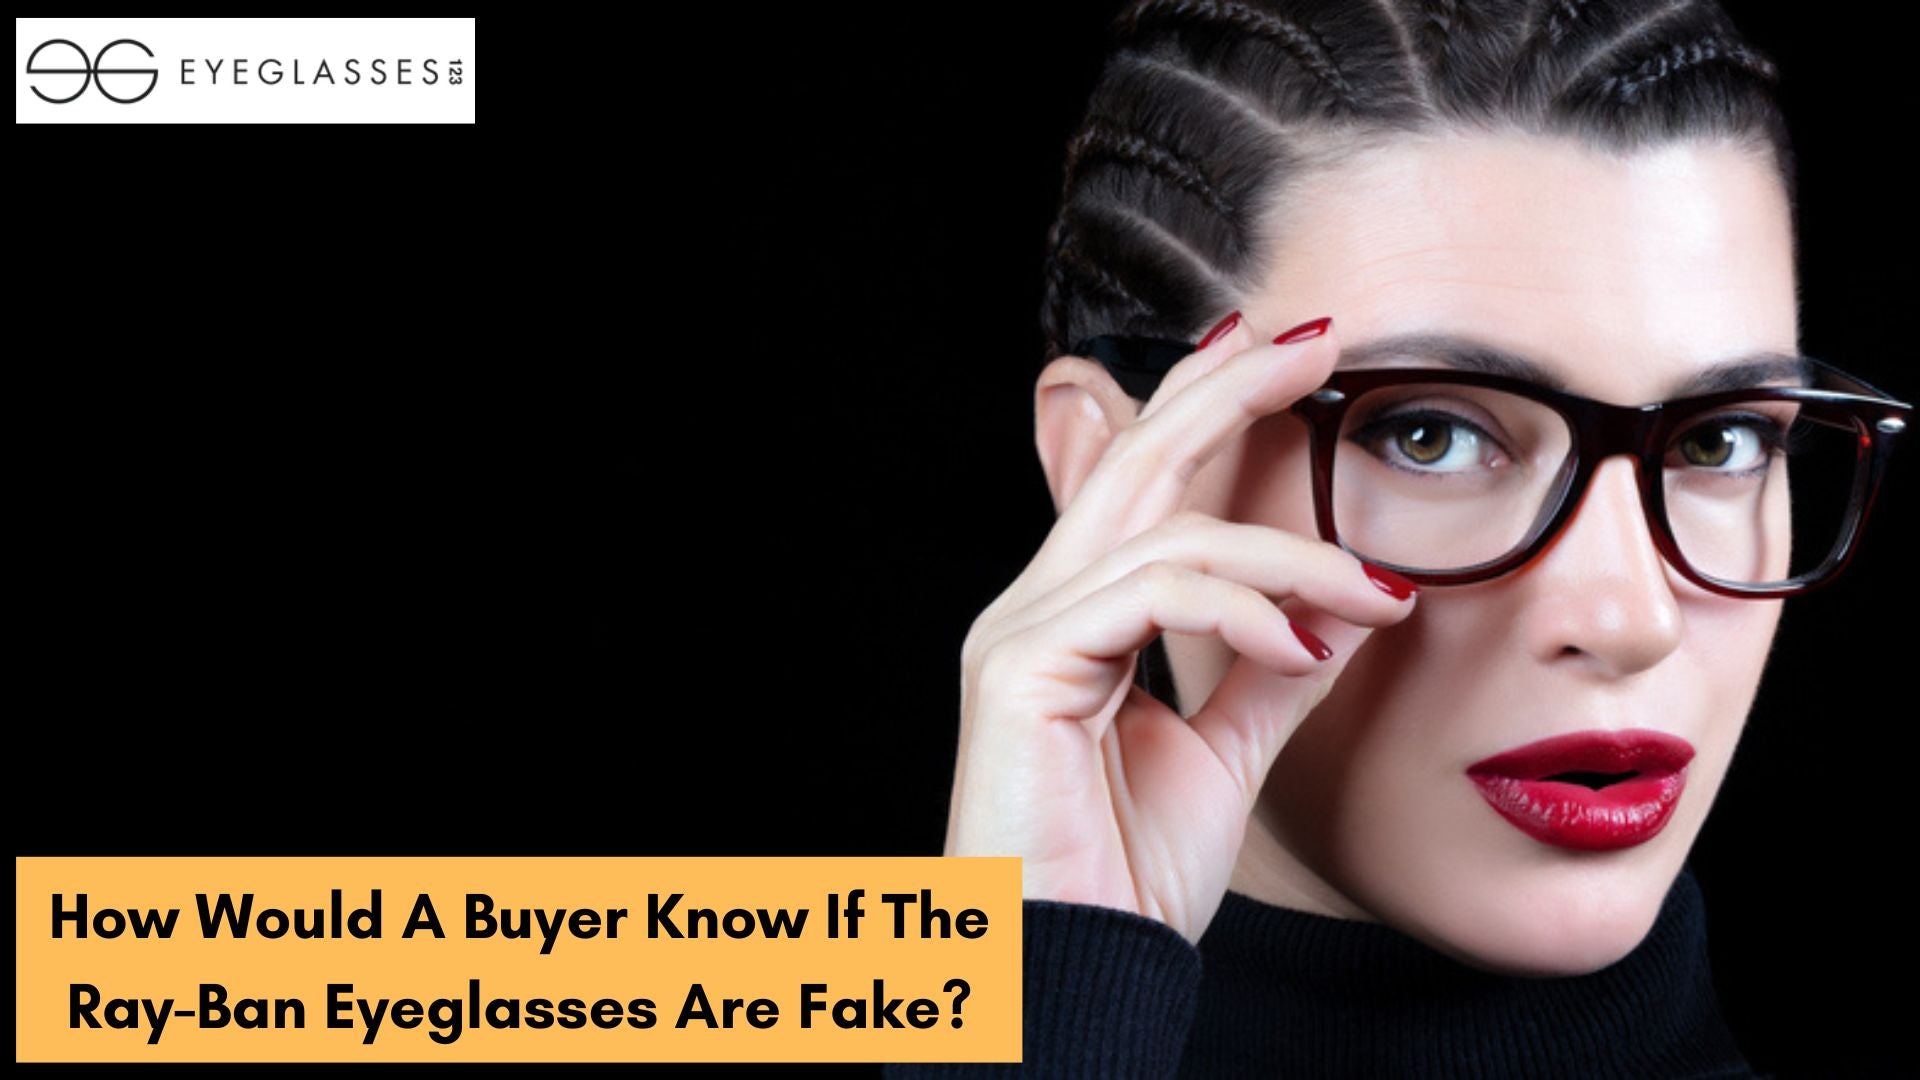 How Would A Buyer Know If The Ray-Ban Eyeglasses Are Fake?